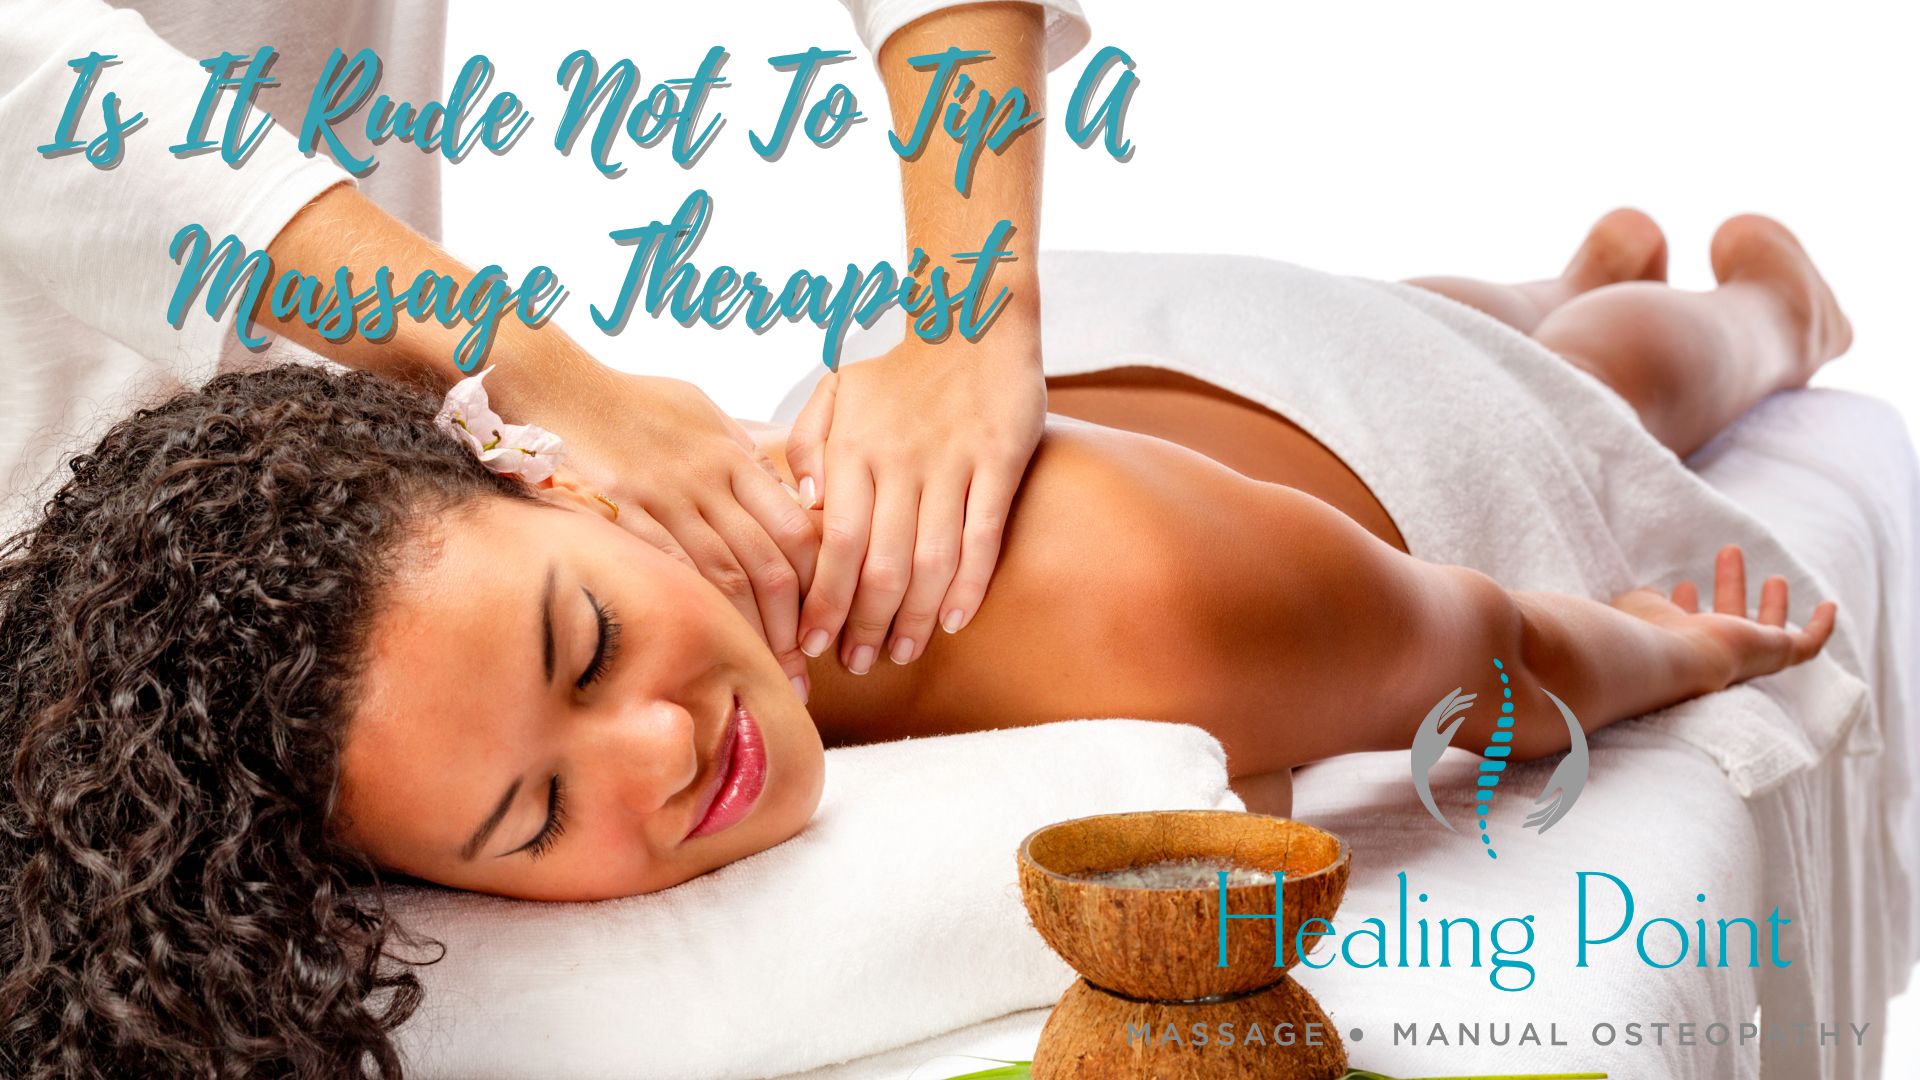 Is It Rude Not To Tip A Massage Therapist by Healing Point Massage Therapy